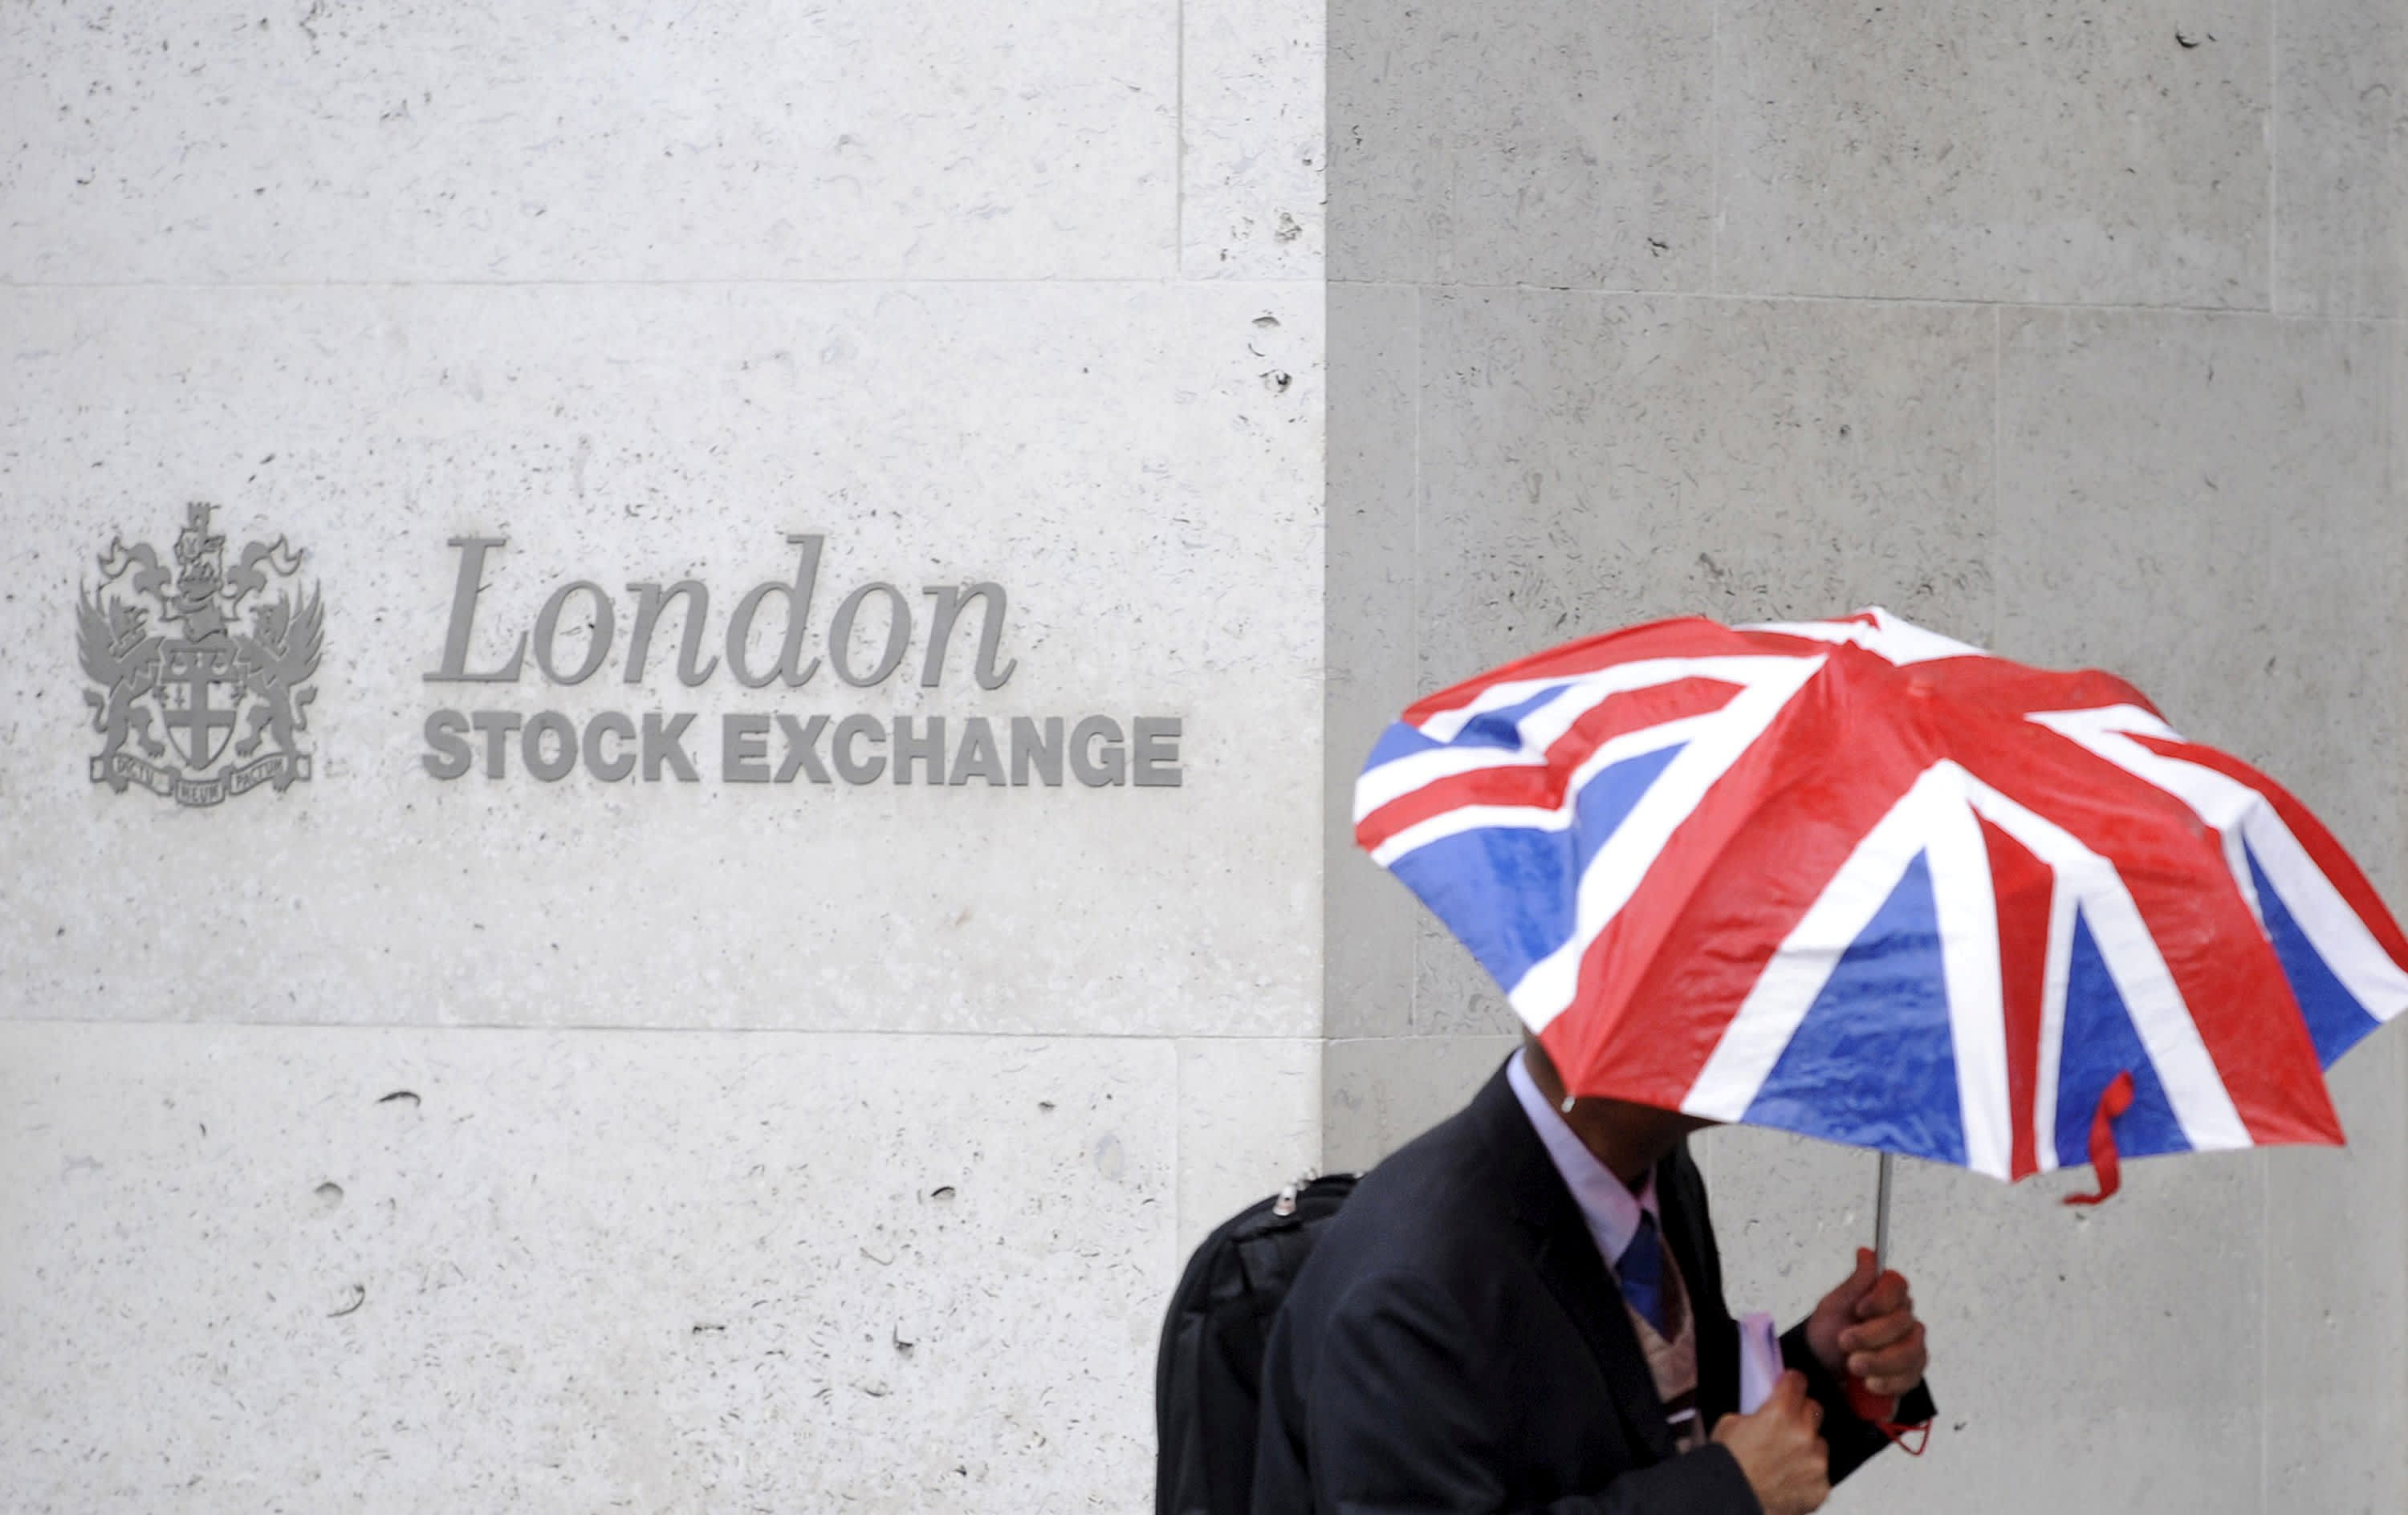 Here's what to buy and sell amid the UK's market turmoil, money managers say